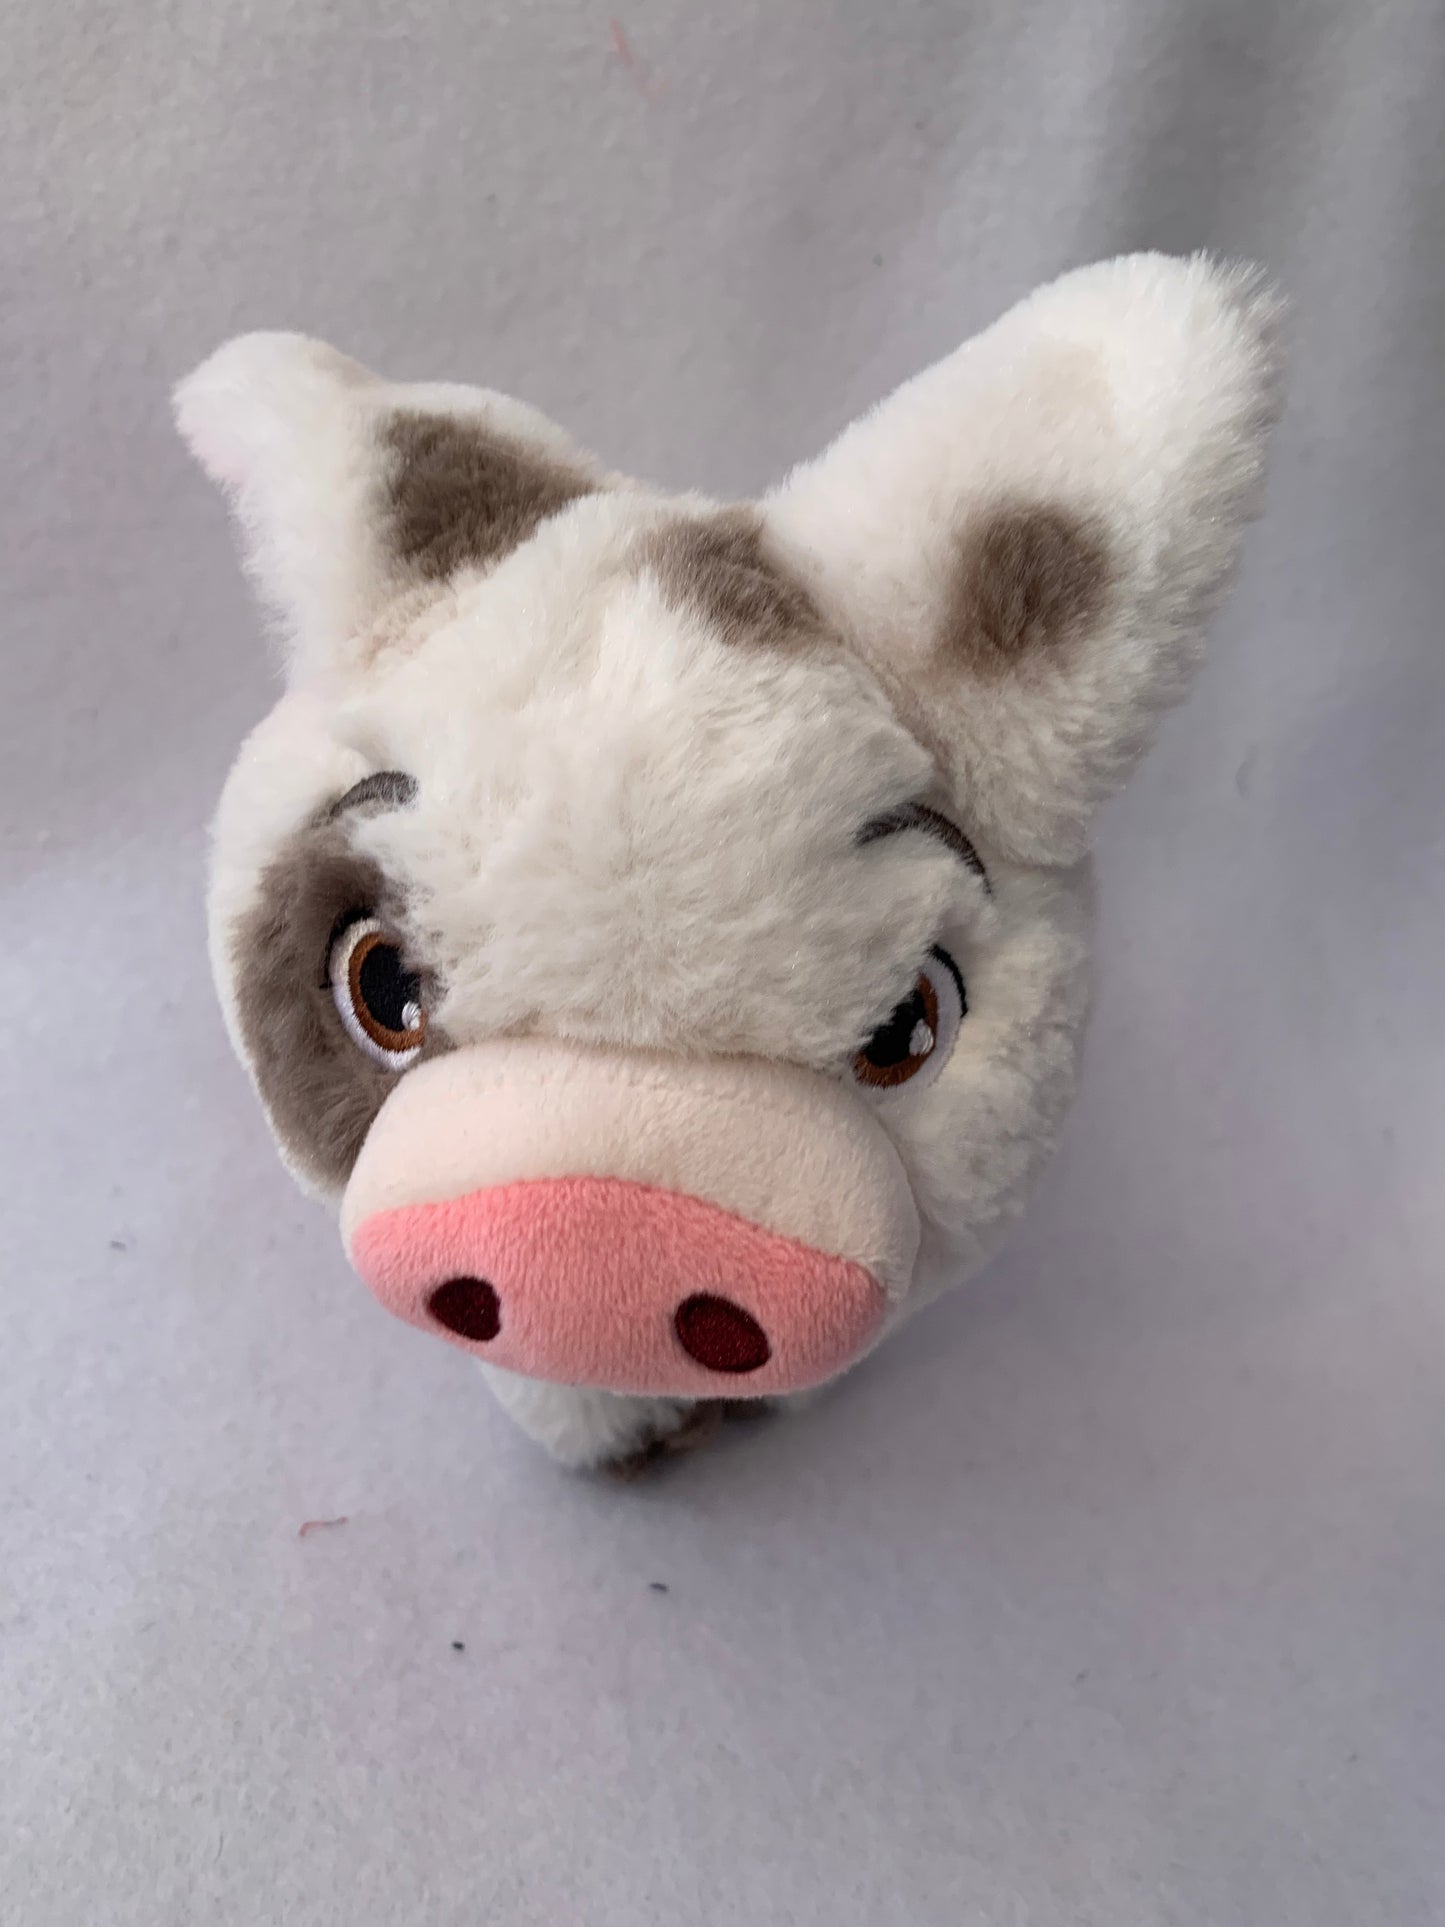 Weighted stuffed animal, cow, chicken, pig or moose with 3 lbs, washable weighted buddy, farm, barn